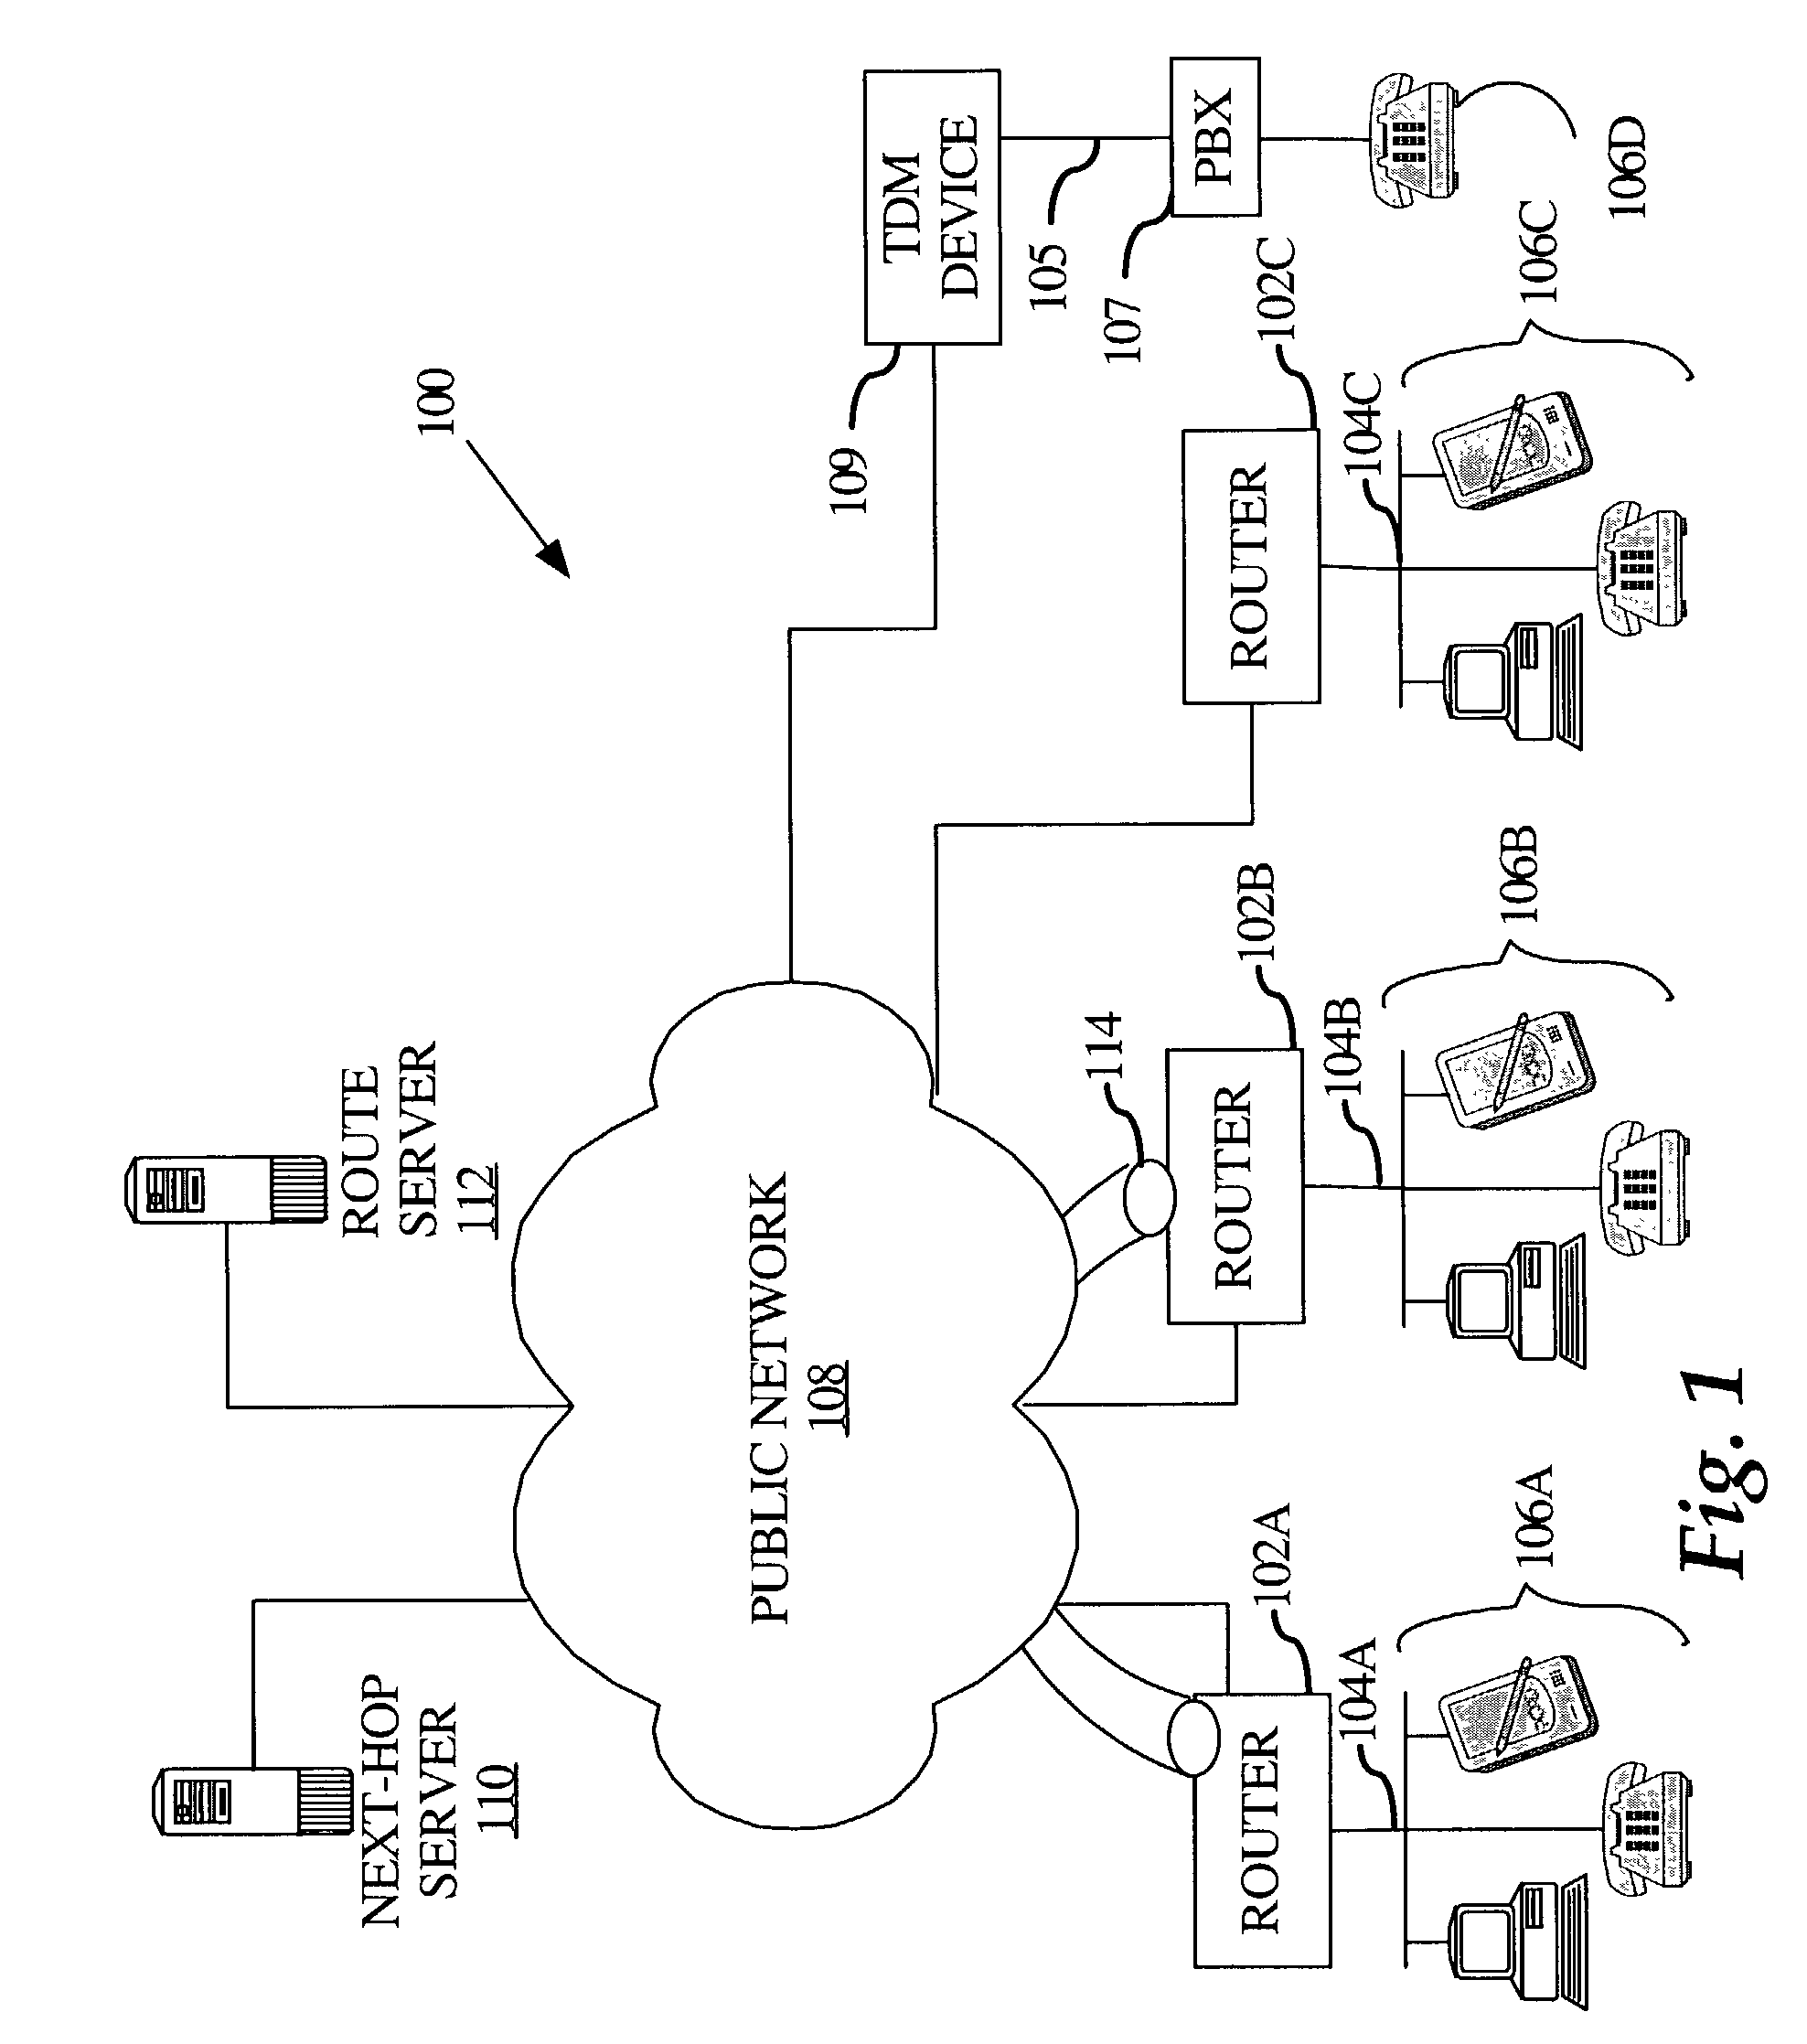 Method and apparatus for dynamically securing voice and other delay-sensitive network traffic